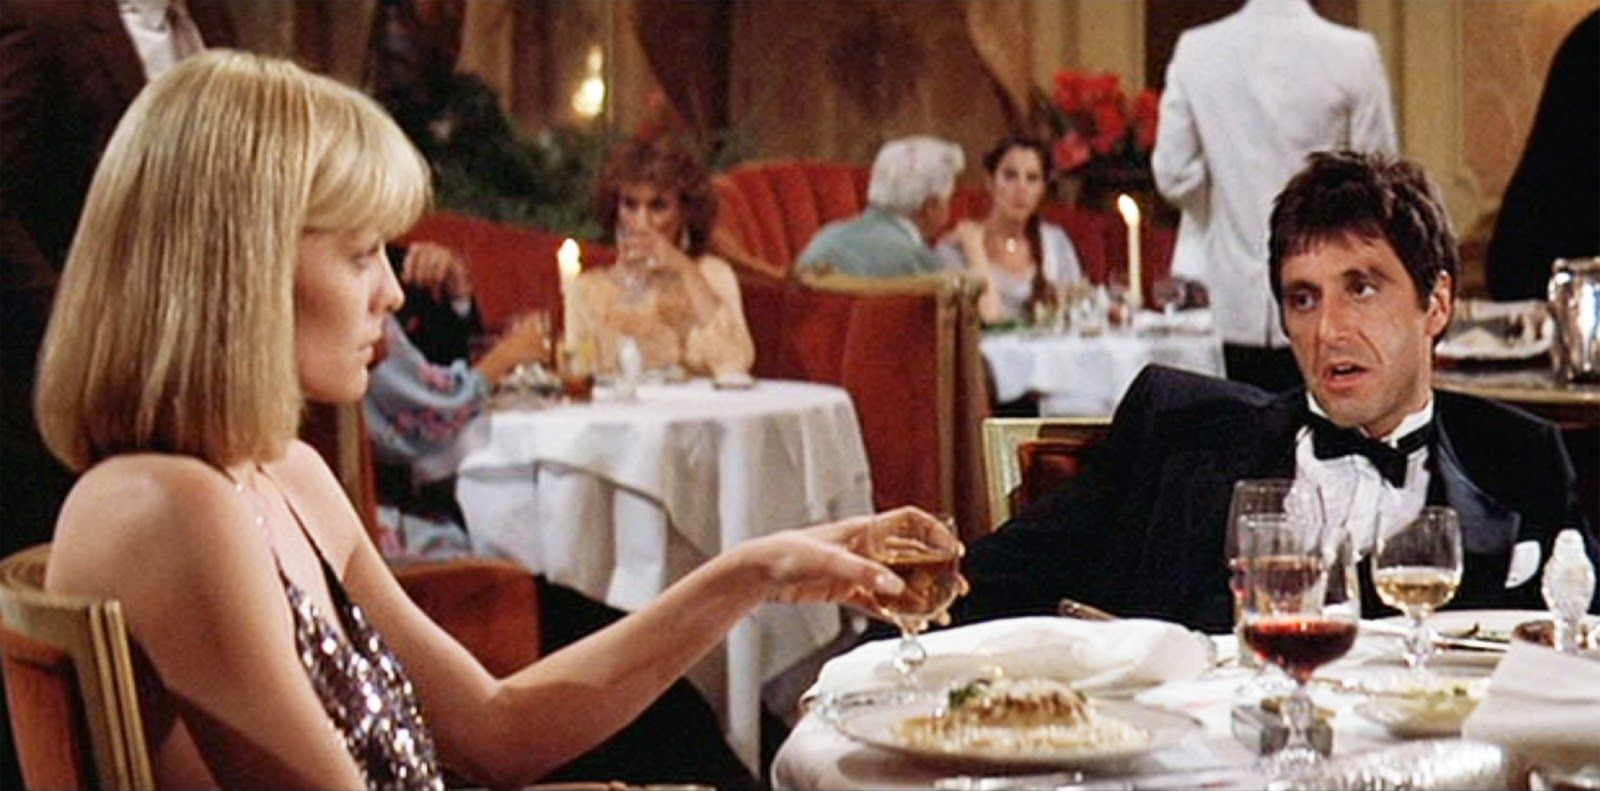 Elvira and Tony eating at a table in a fancy dinner club